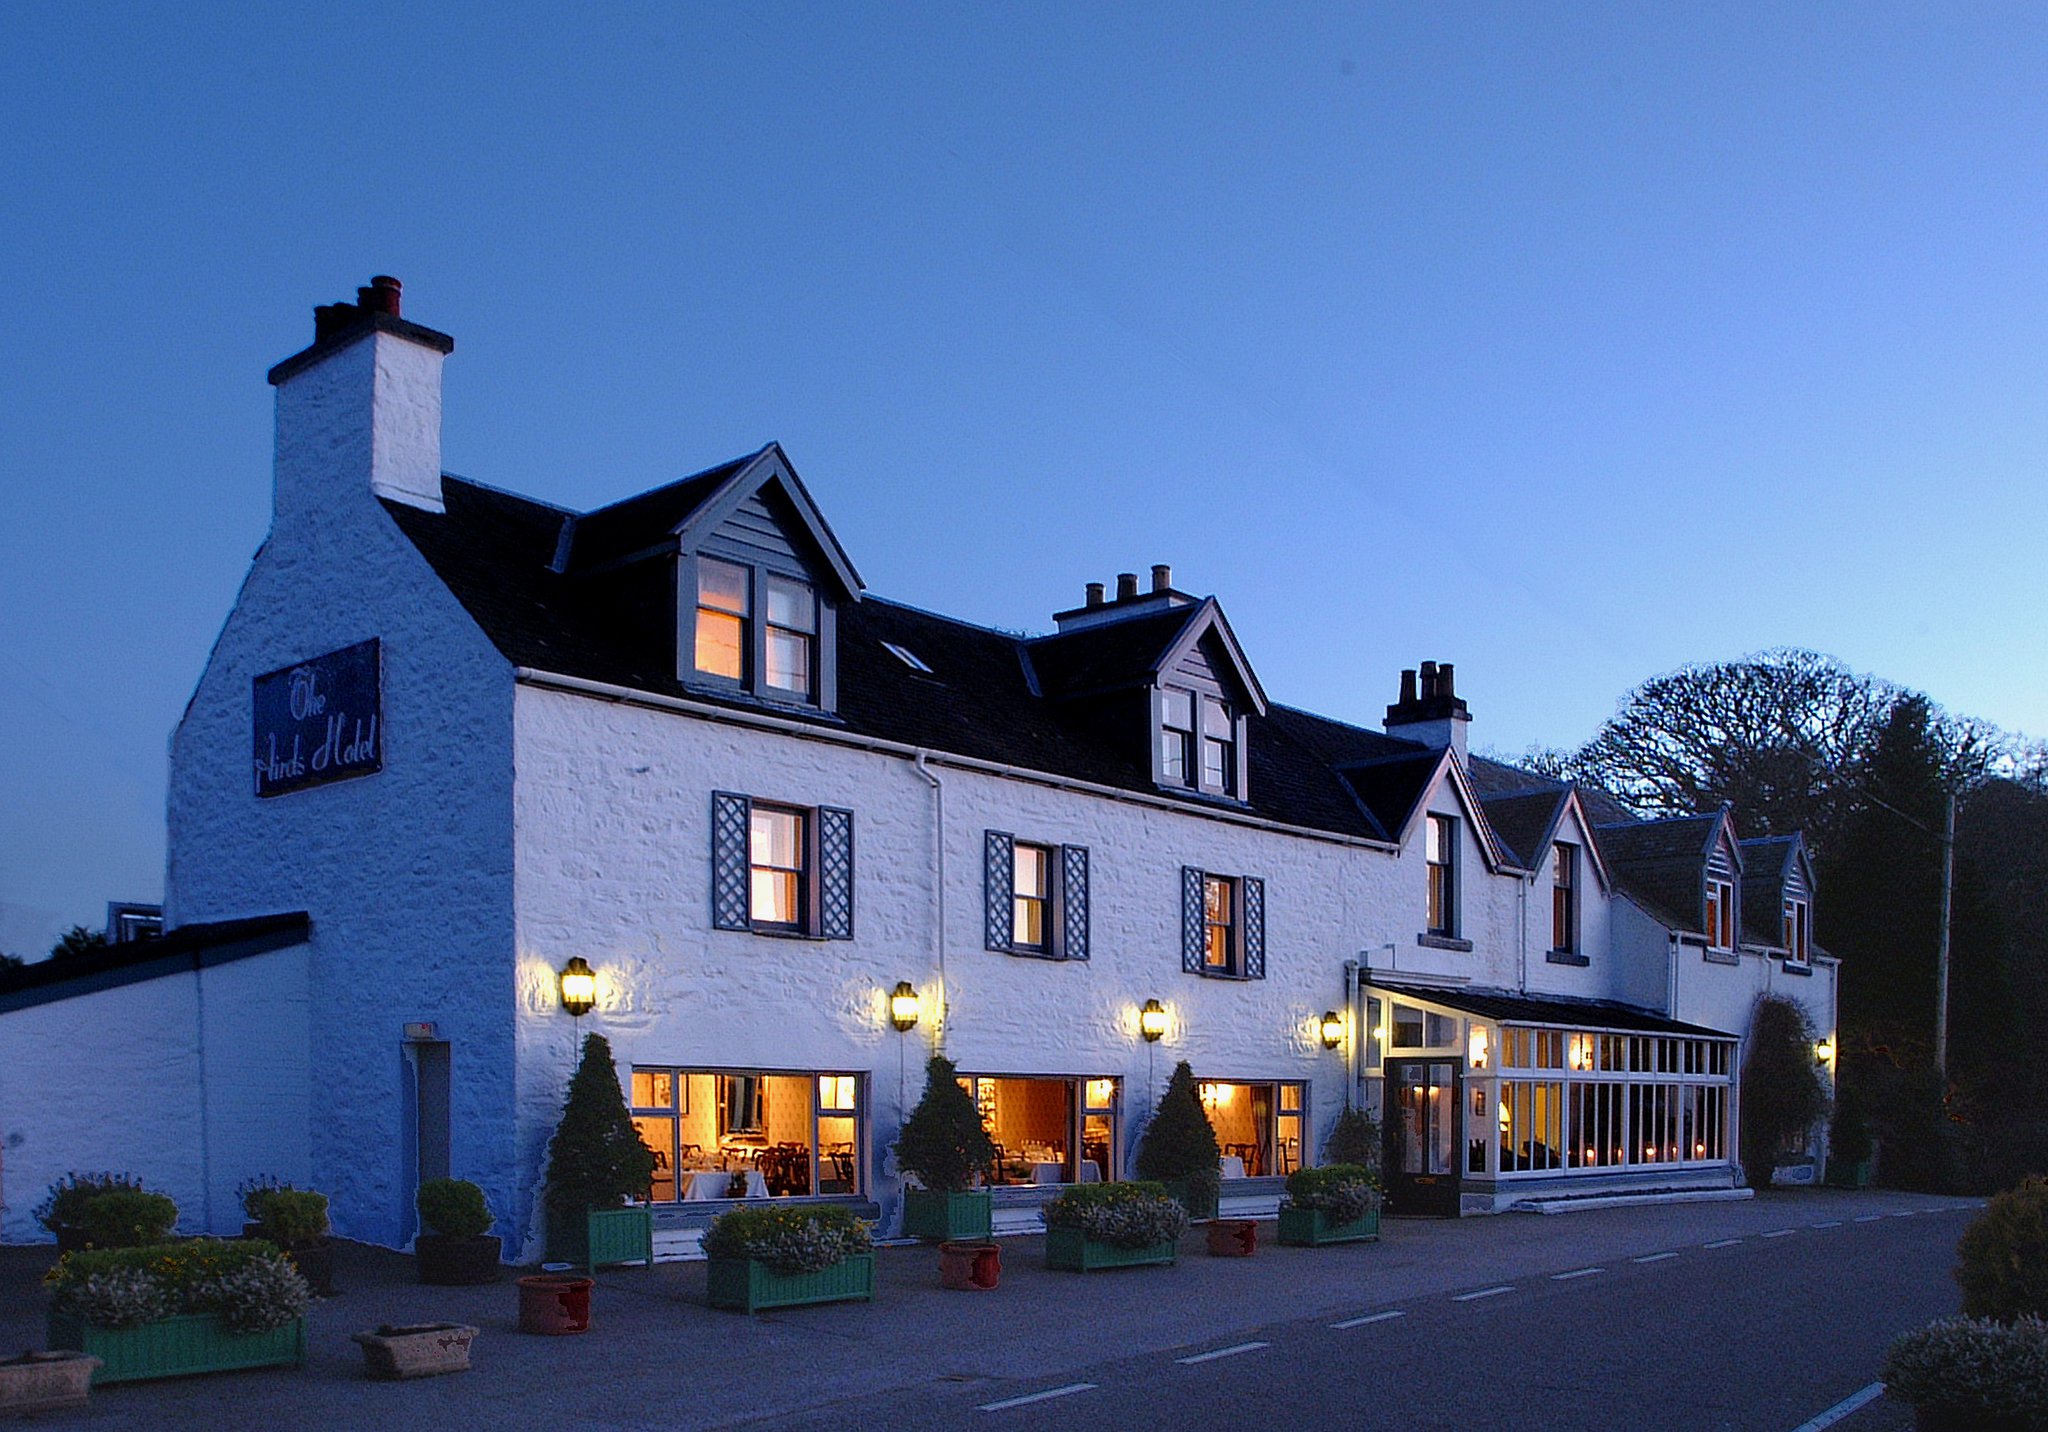 The Airds Hotel and Restaurant in Port Appin